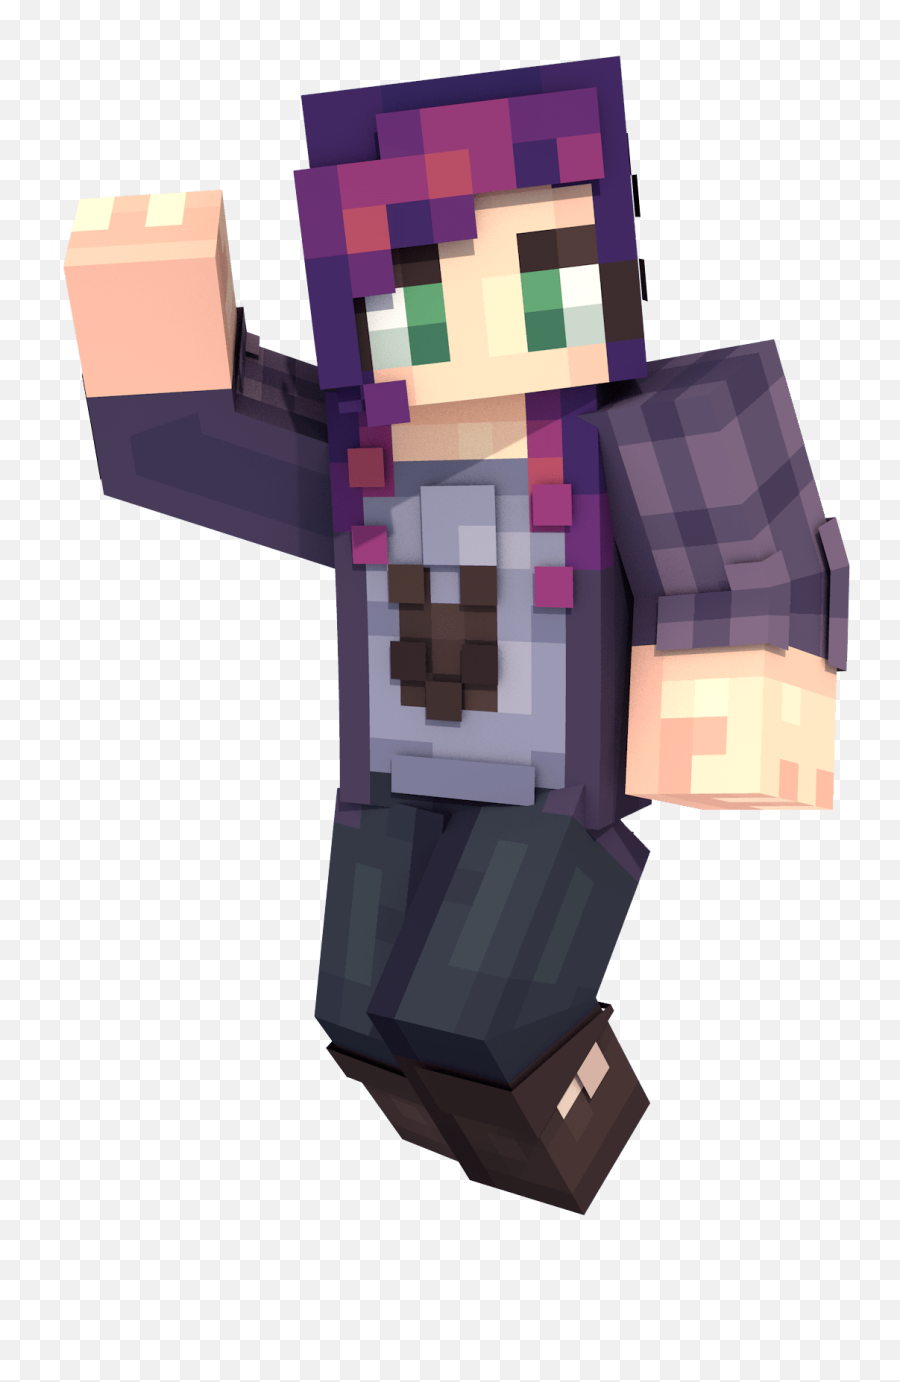 Render Your Minecraft Character In 3d - Minecraft Characters In 3d Png,Minecraft Characters Png